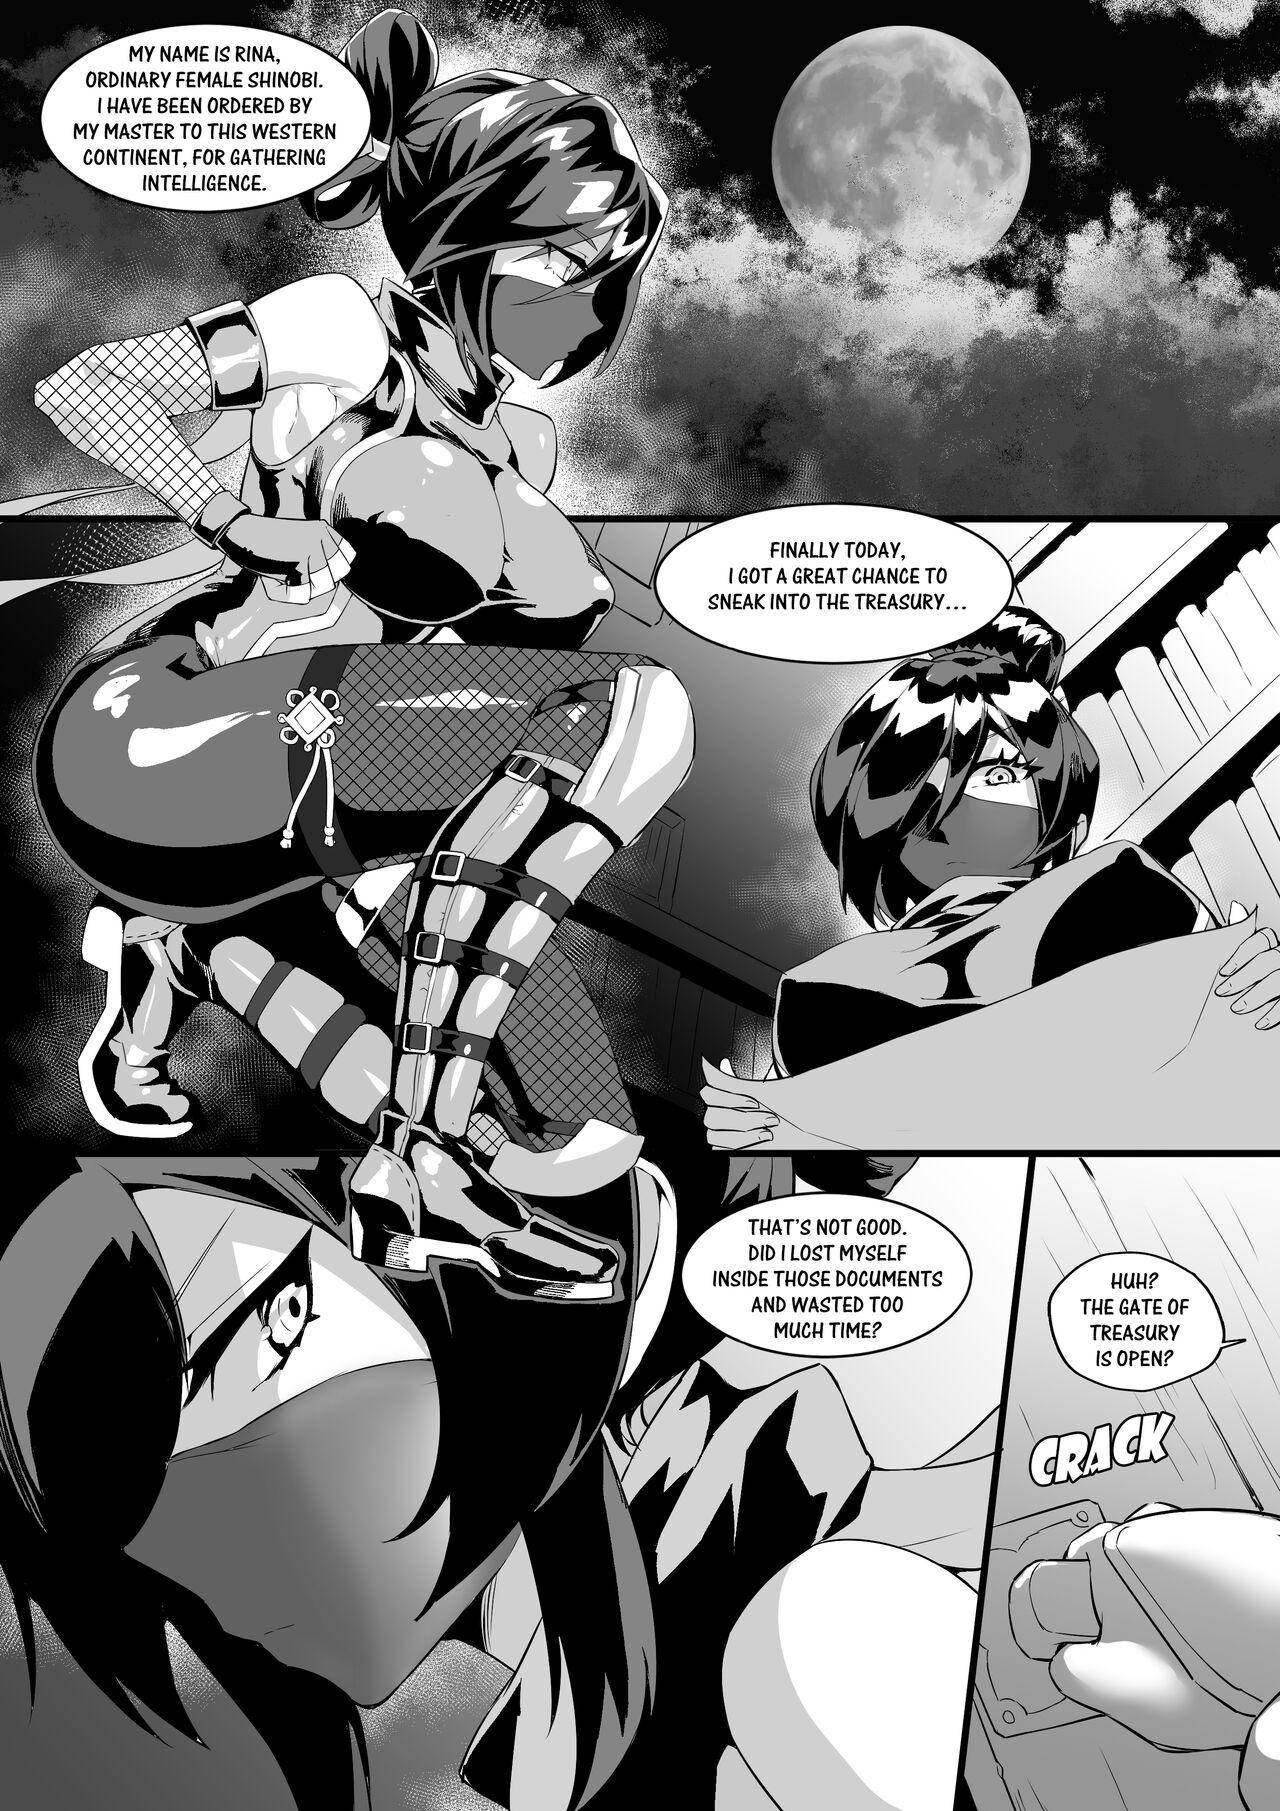 Stretching Giant Shadow Looming Over Stealth in Eastern Style - Original Female - Page 2